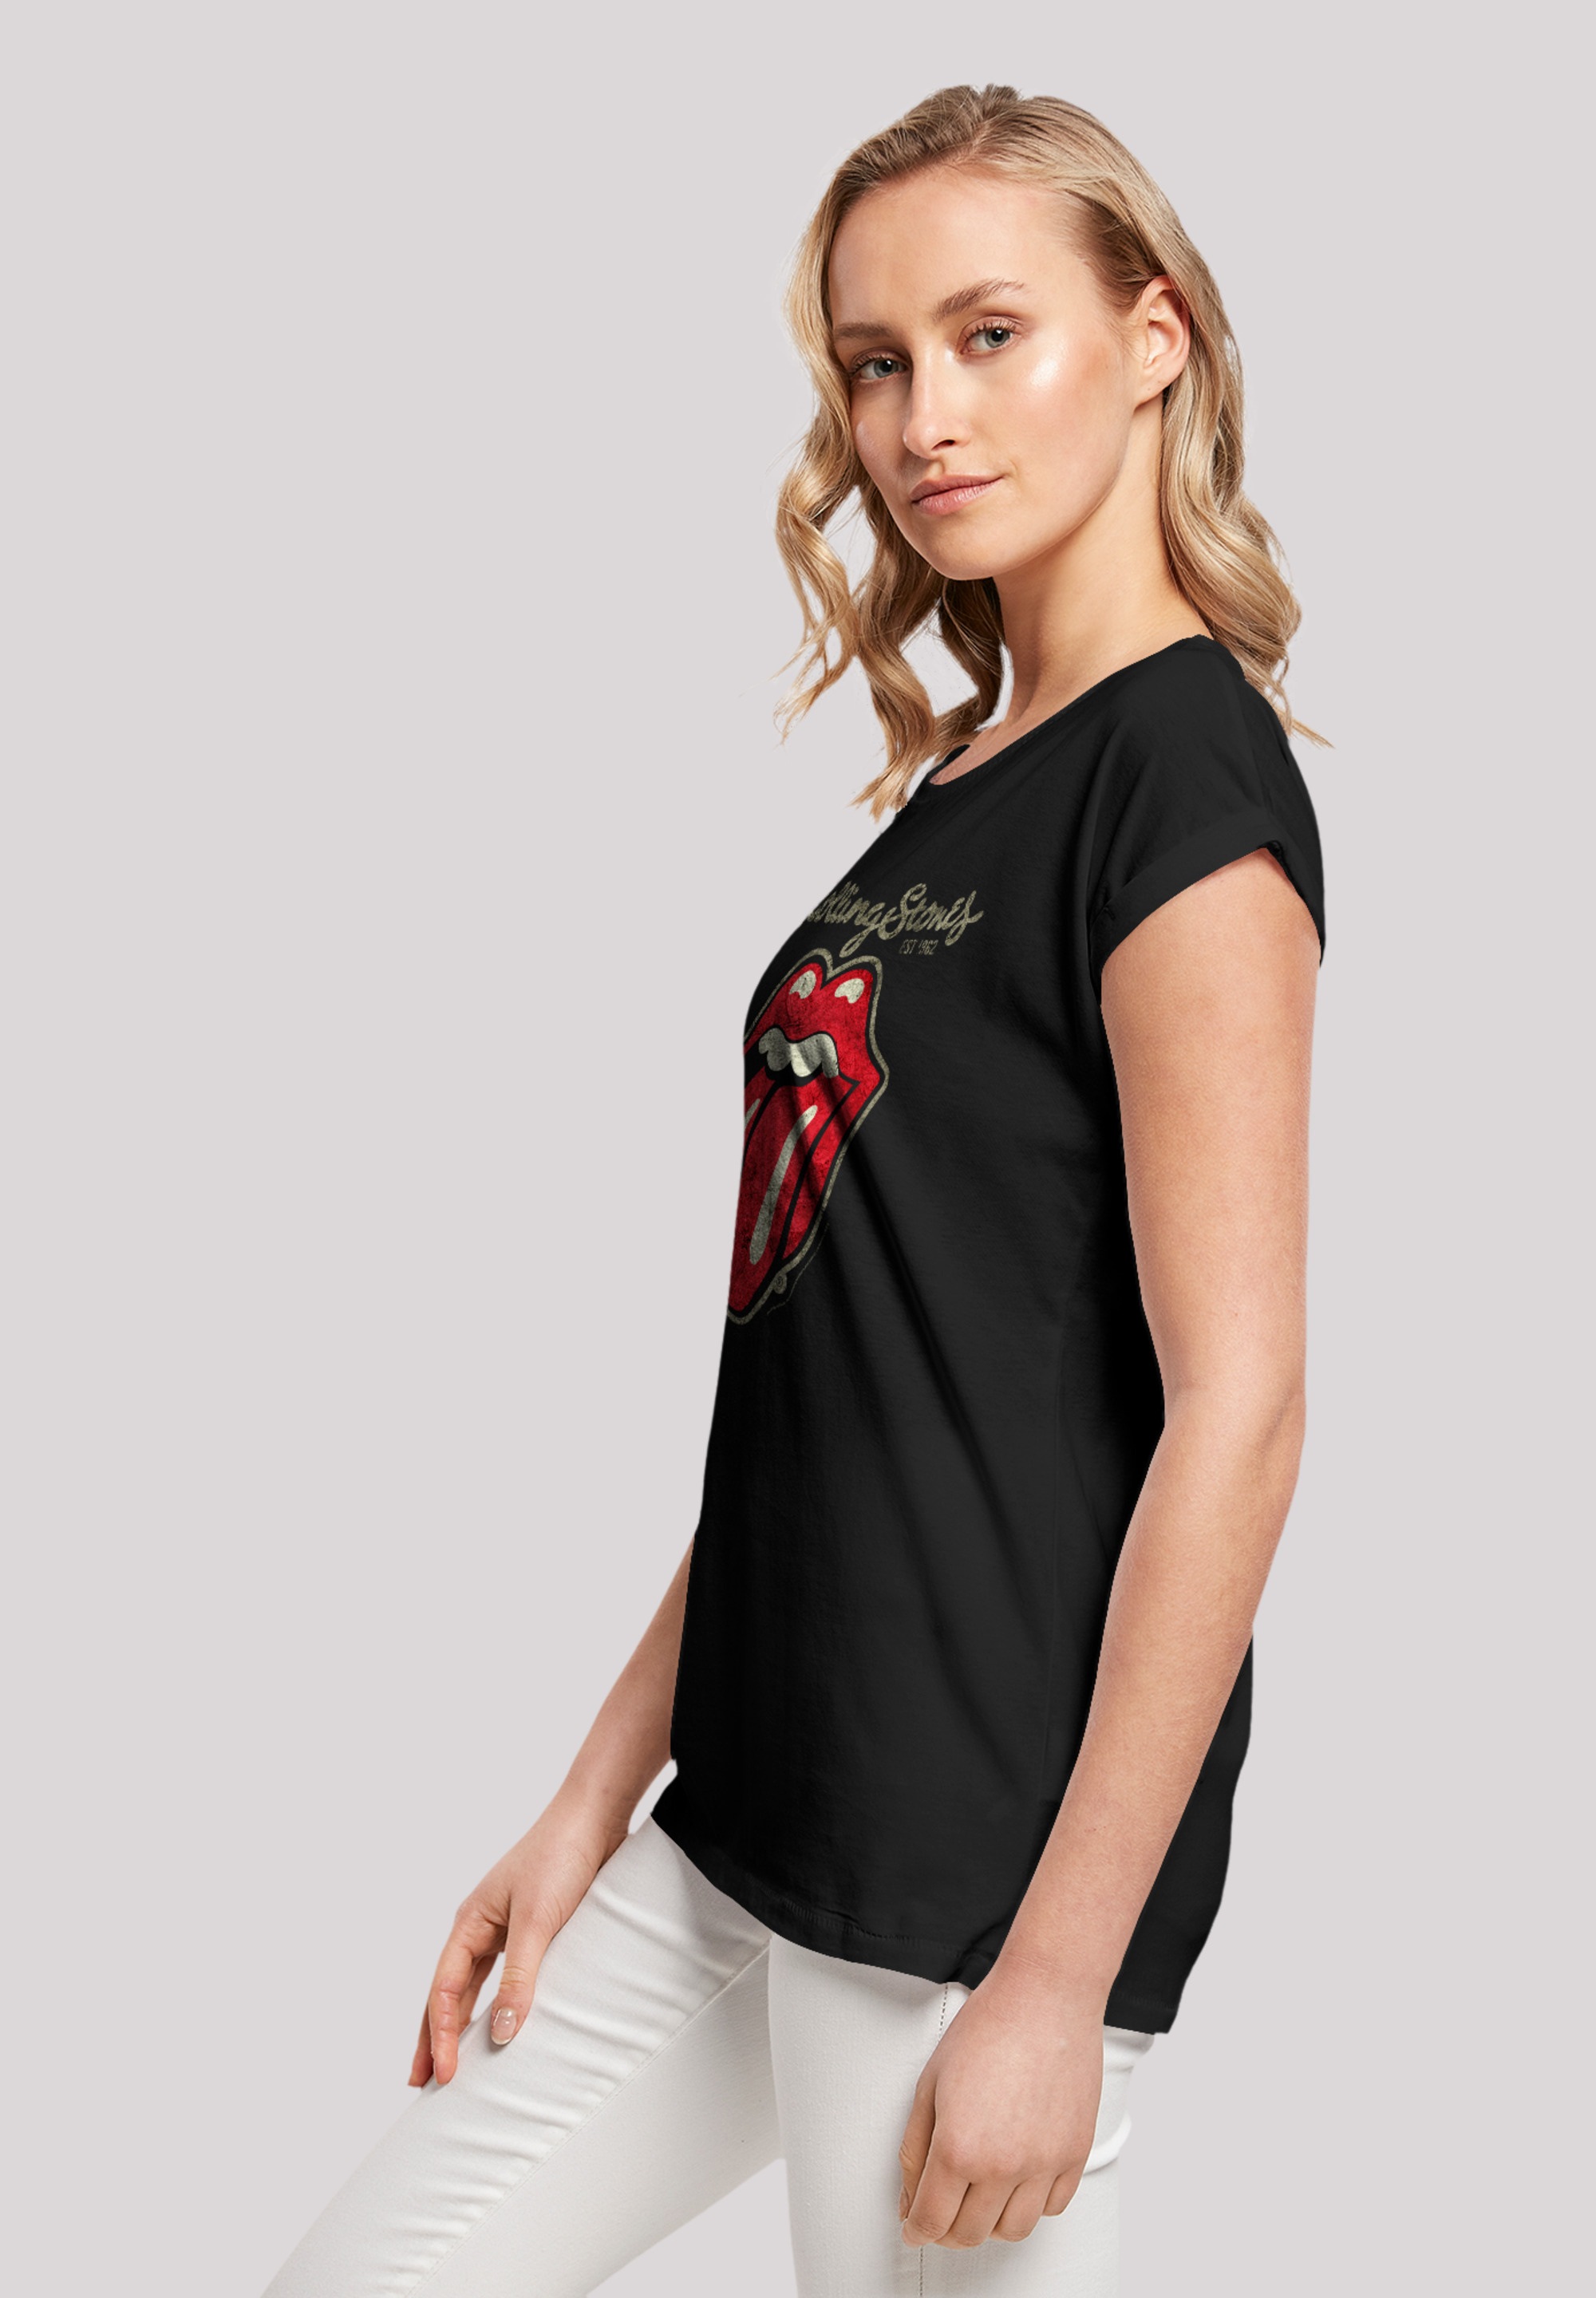 F4NT4STIC T-Shirt »The Rolling Stones Plastered Tongue Washed«, Premium  Qualität | I\'m walking